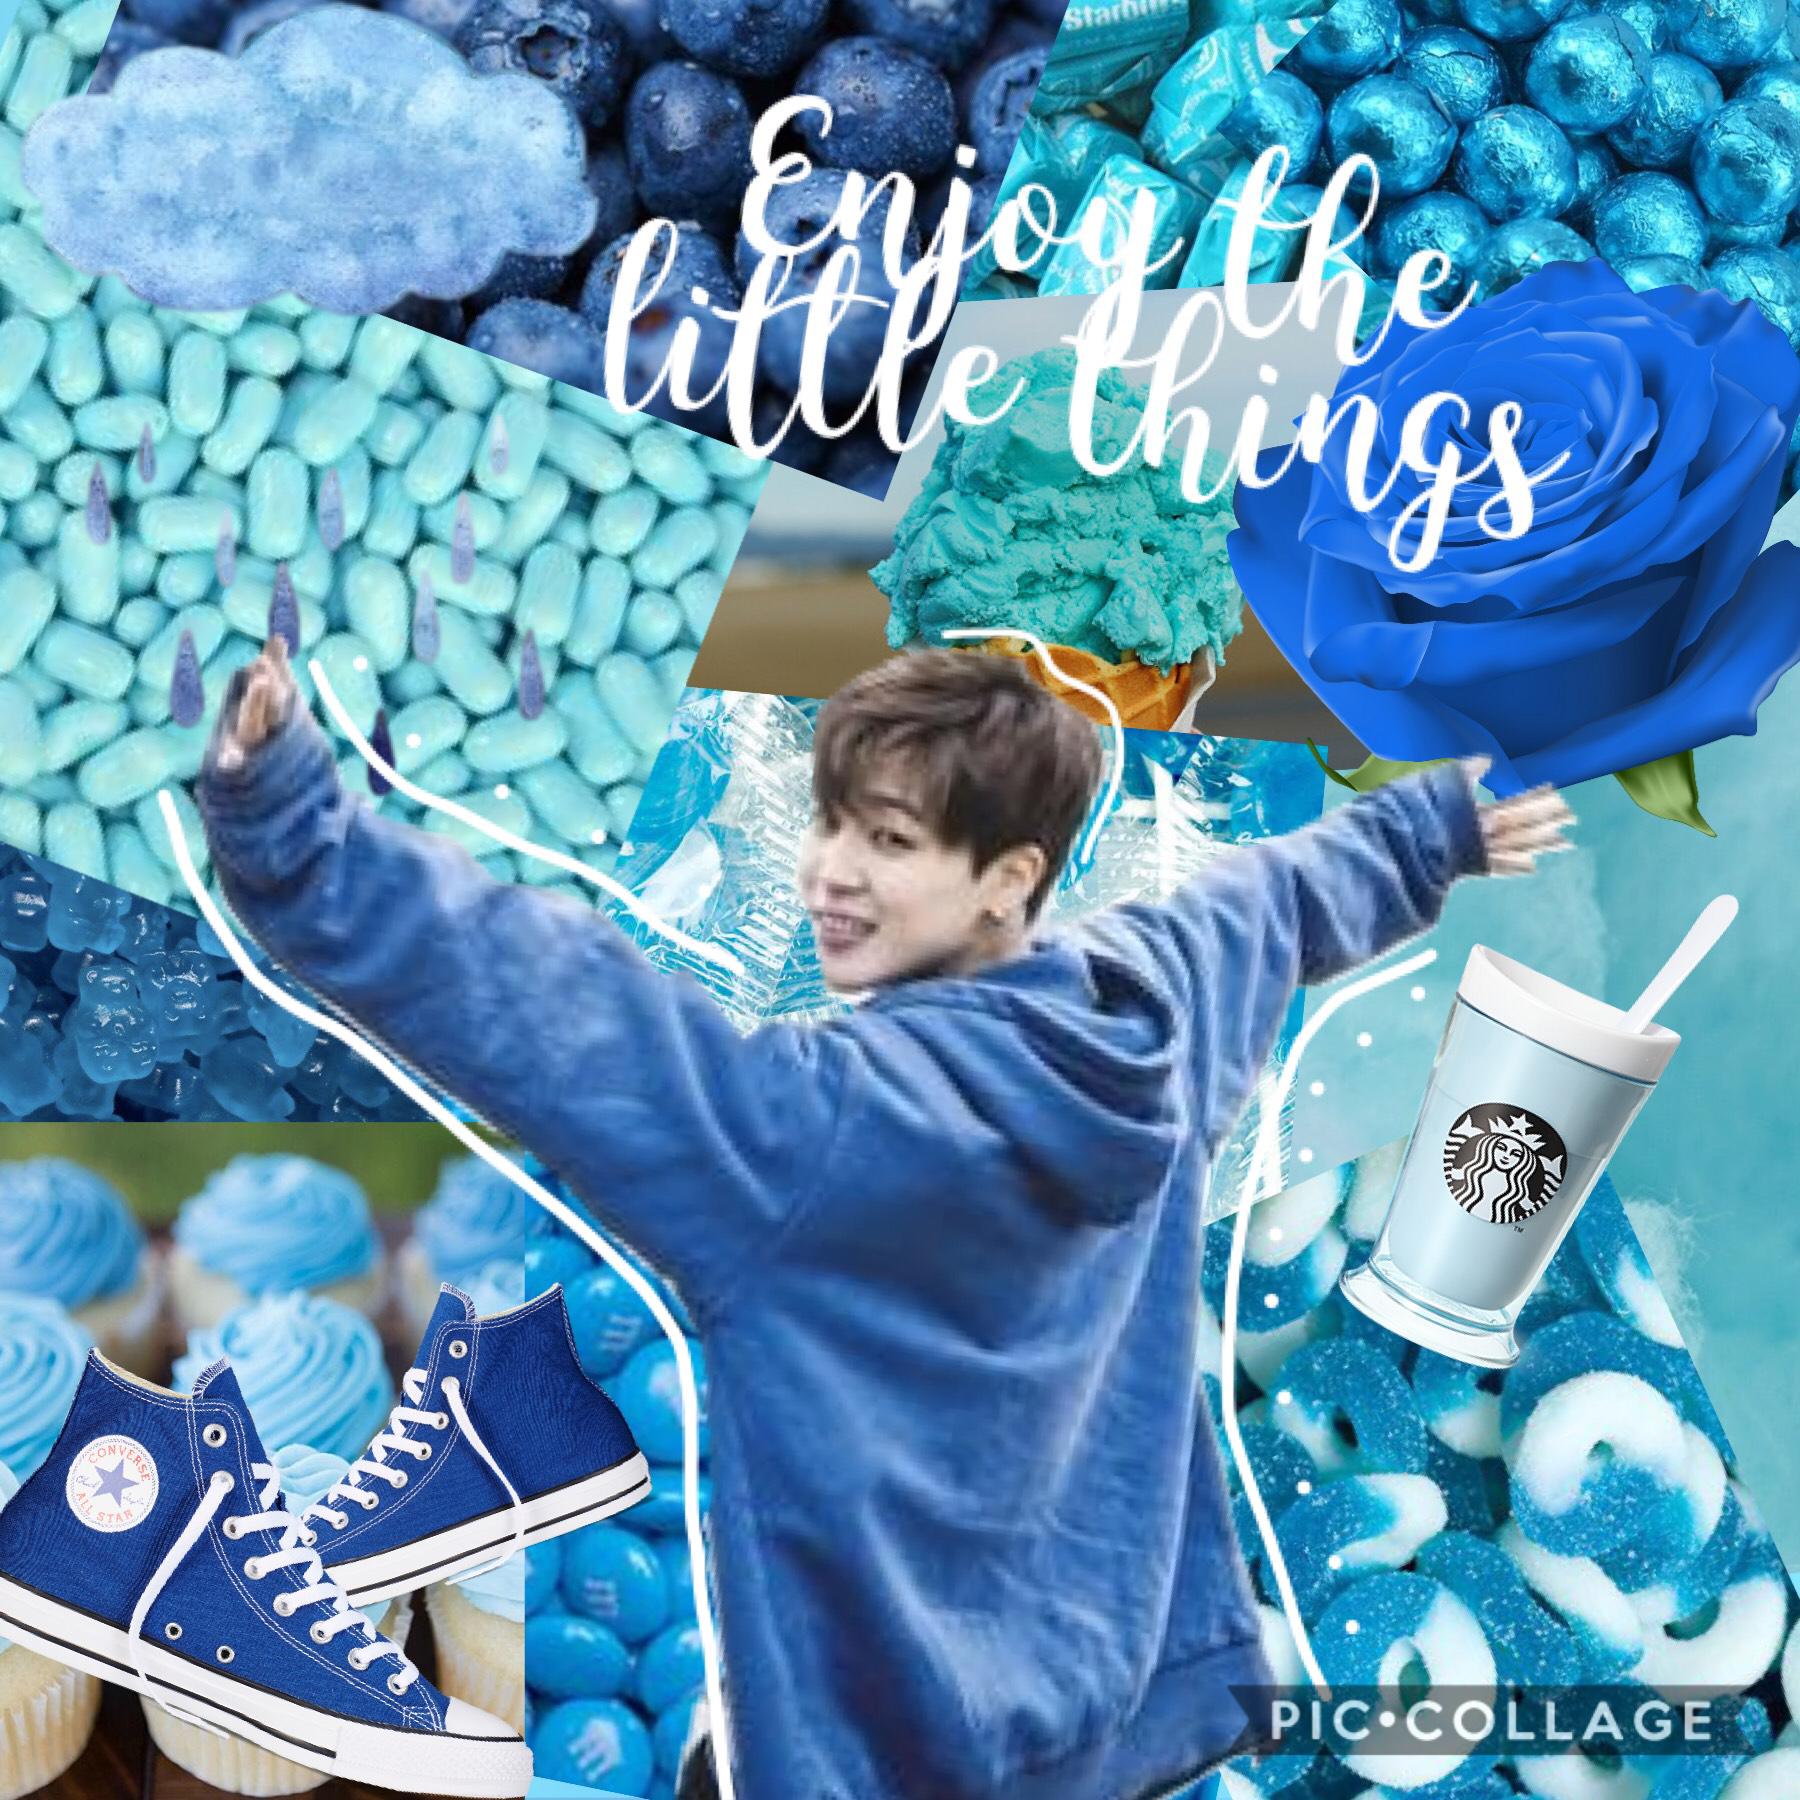 💙tap💙

@BTSisMyLife back again with another discarded edit 

This was one of the first edits I ever made 😅

This account will probably be less active because me and @TastelessRatatouille are very busy nowadays 😕
